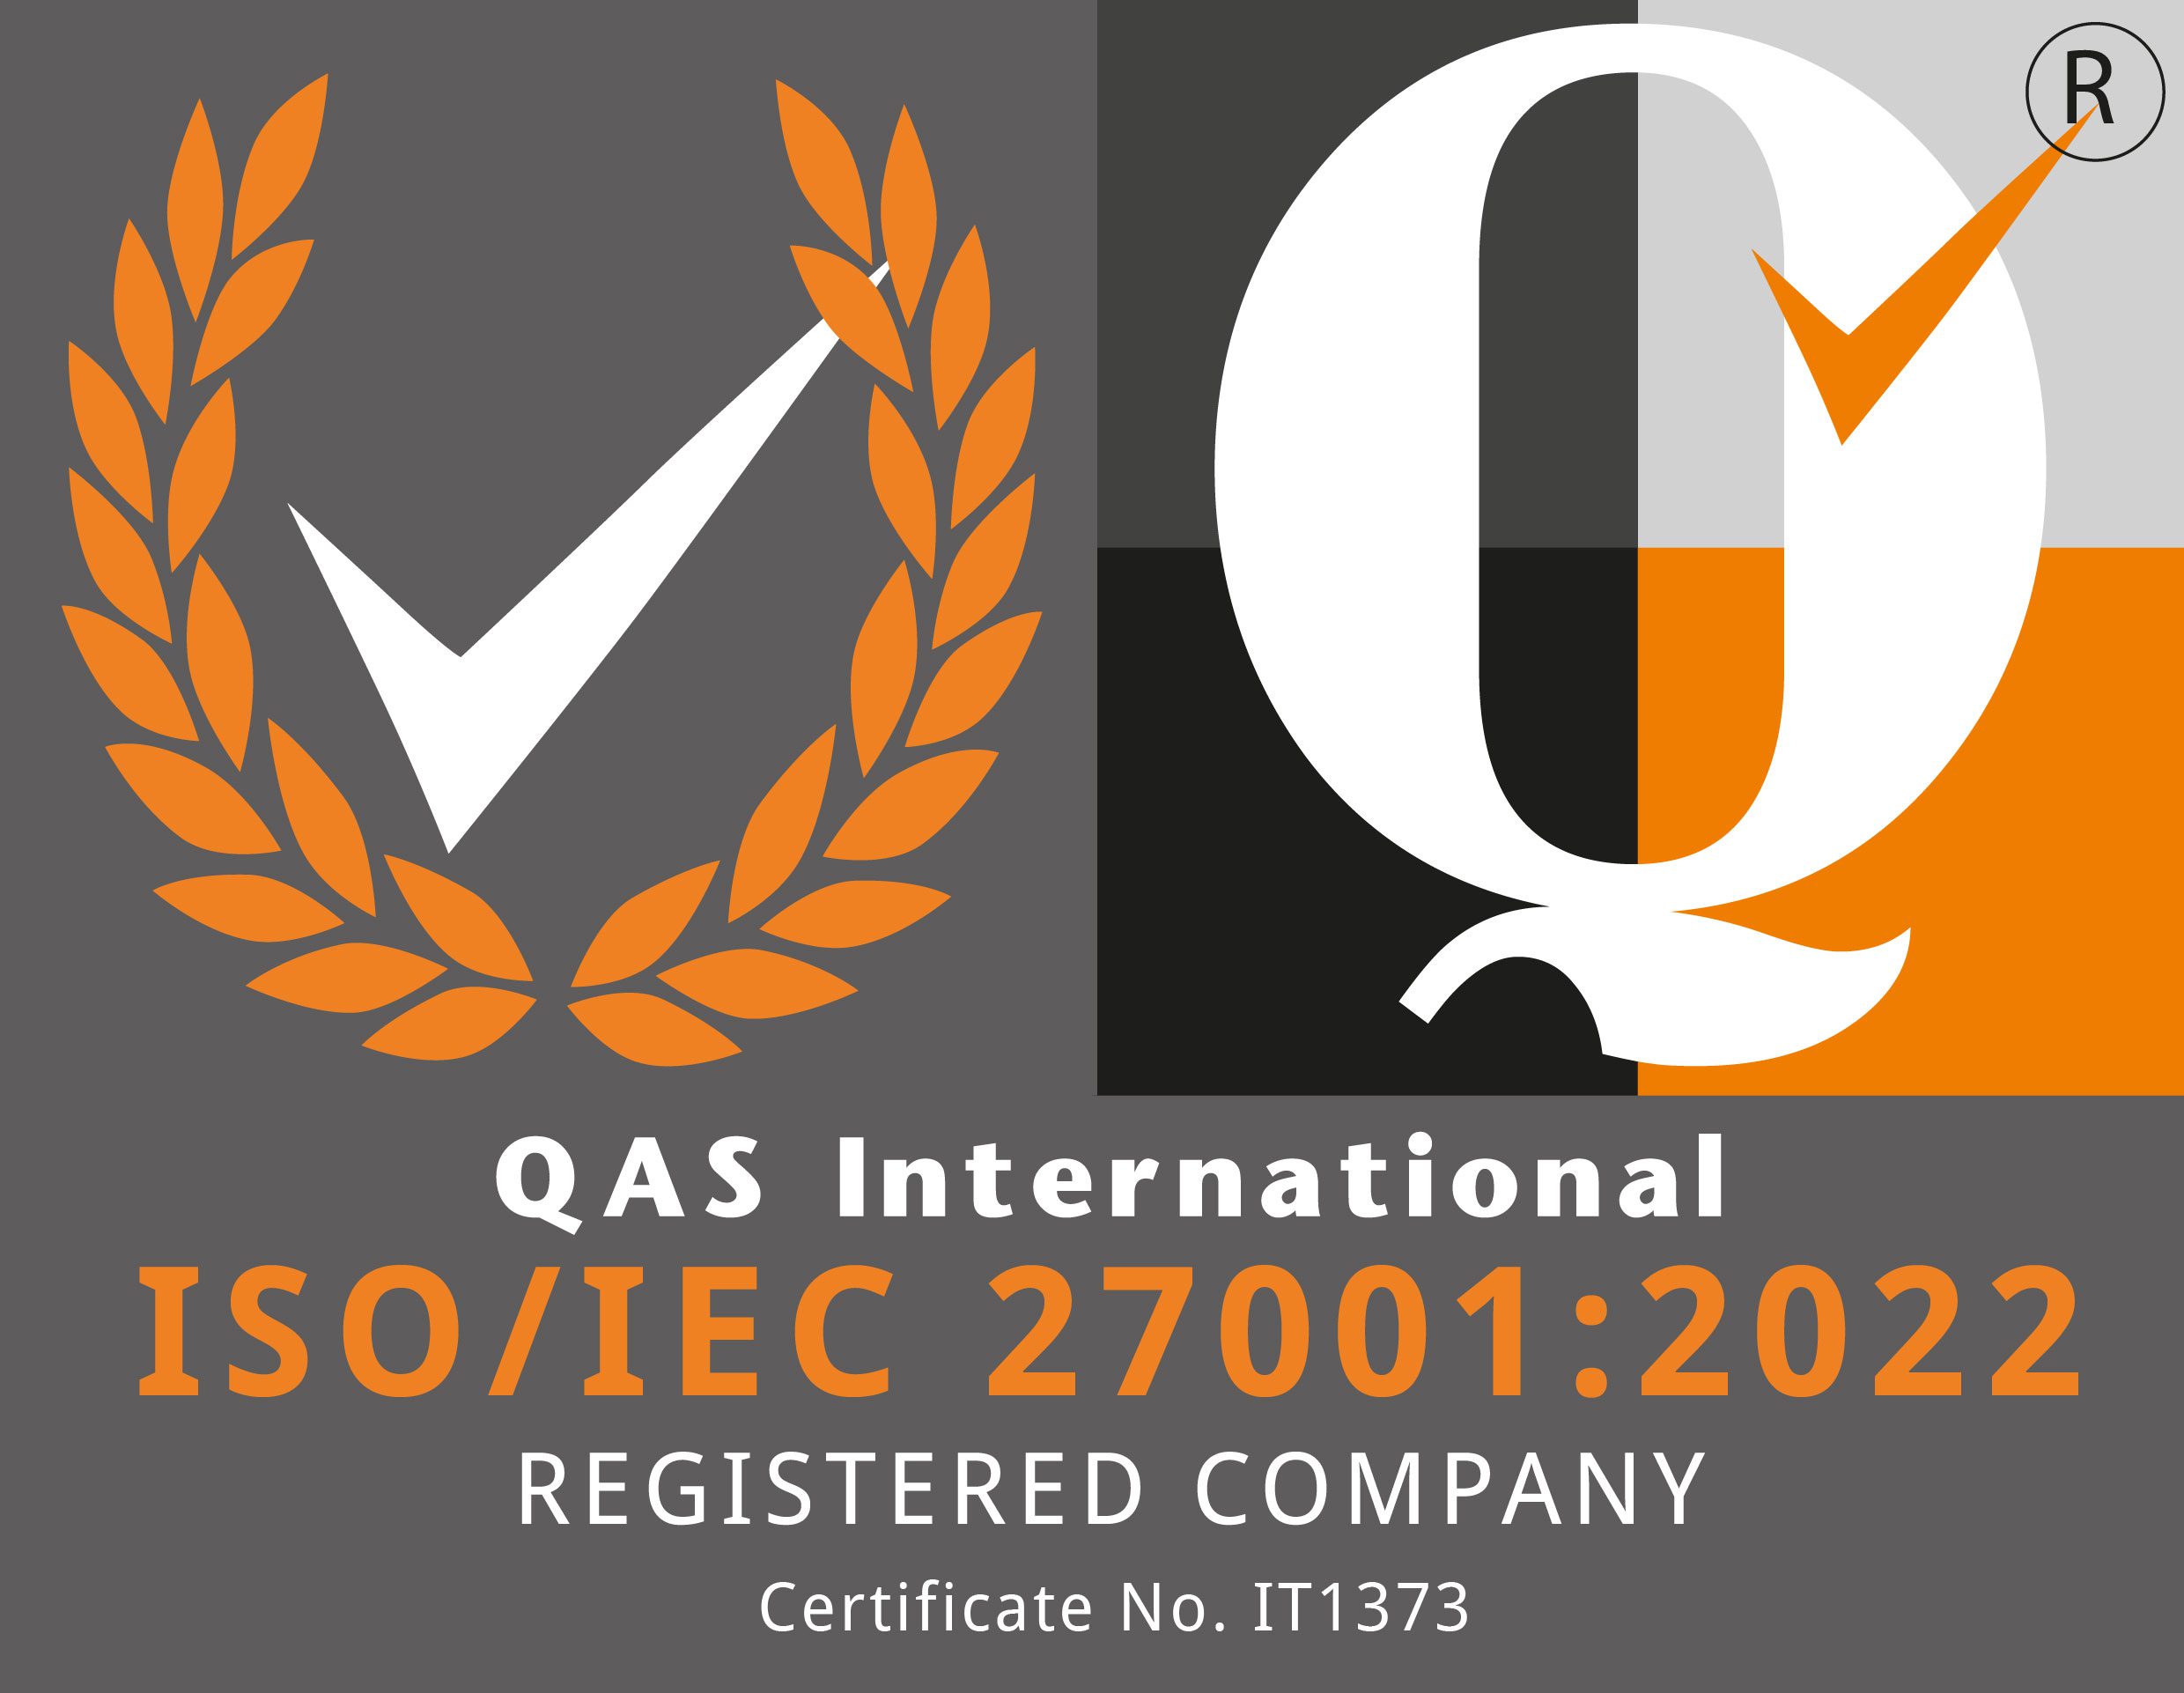 ISO27001 certification